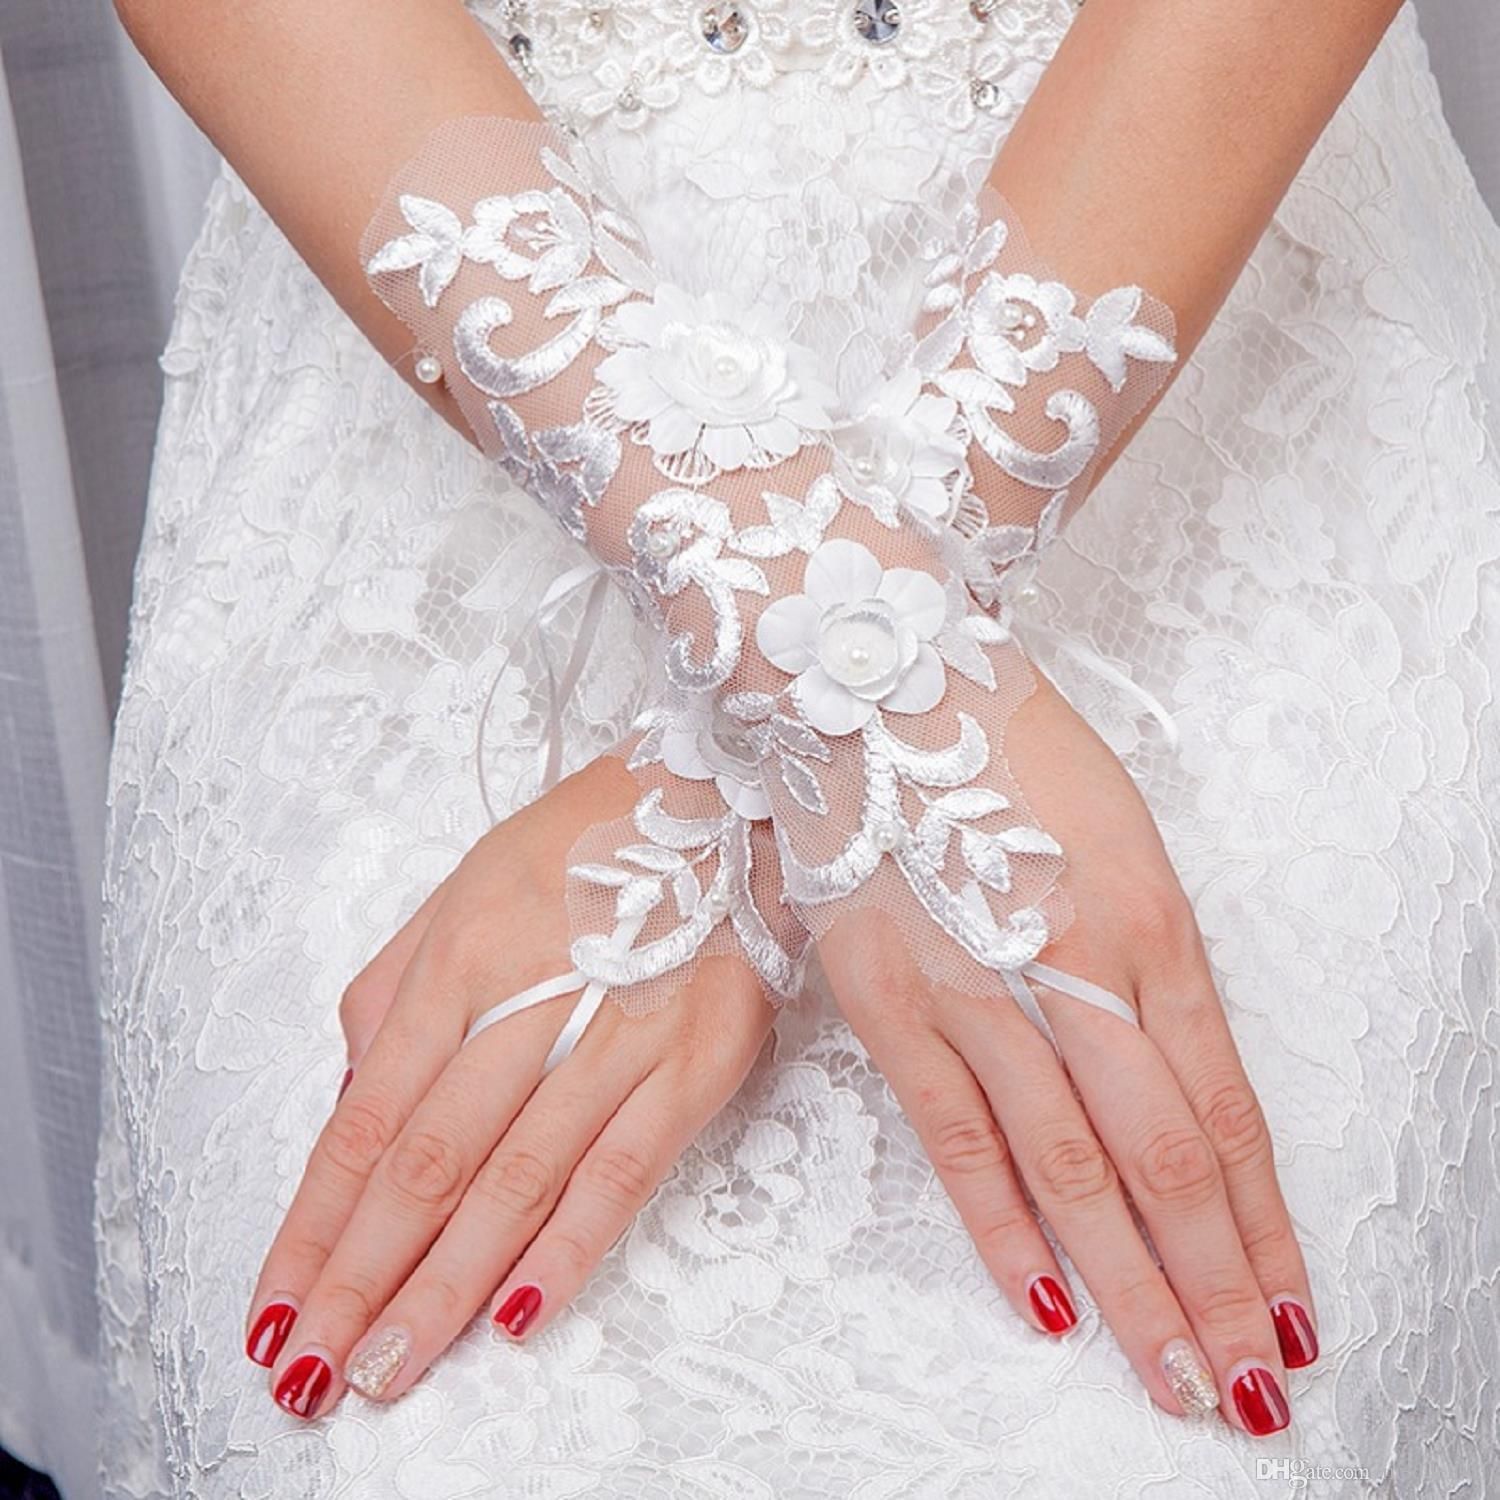 2019 Women/'s Lady Ivory Lace Wedding Gloves Wedding Bridal Party Gloves Mittens